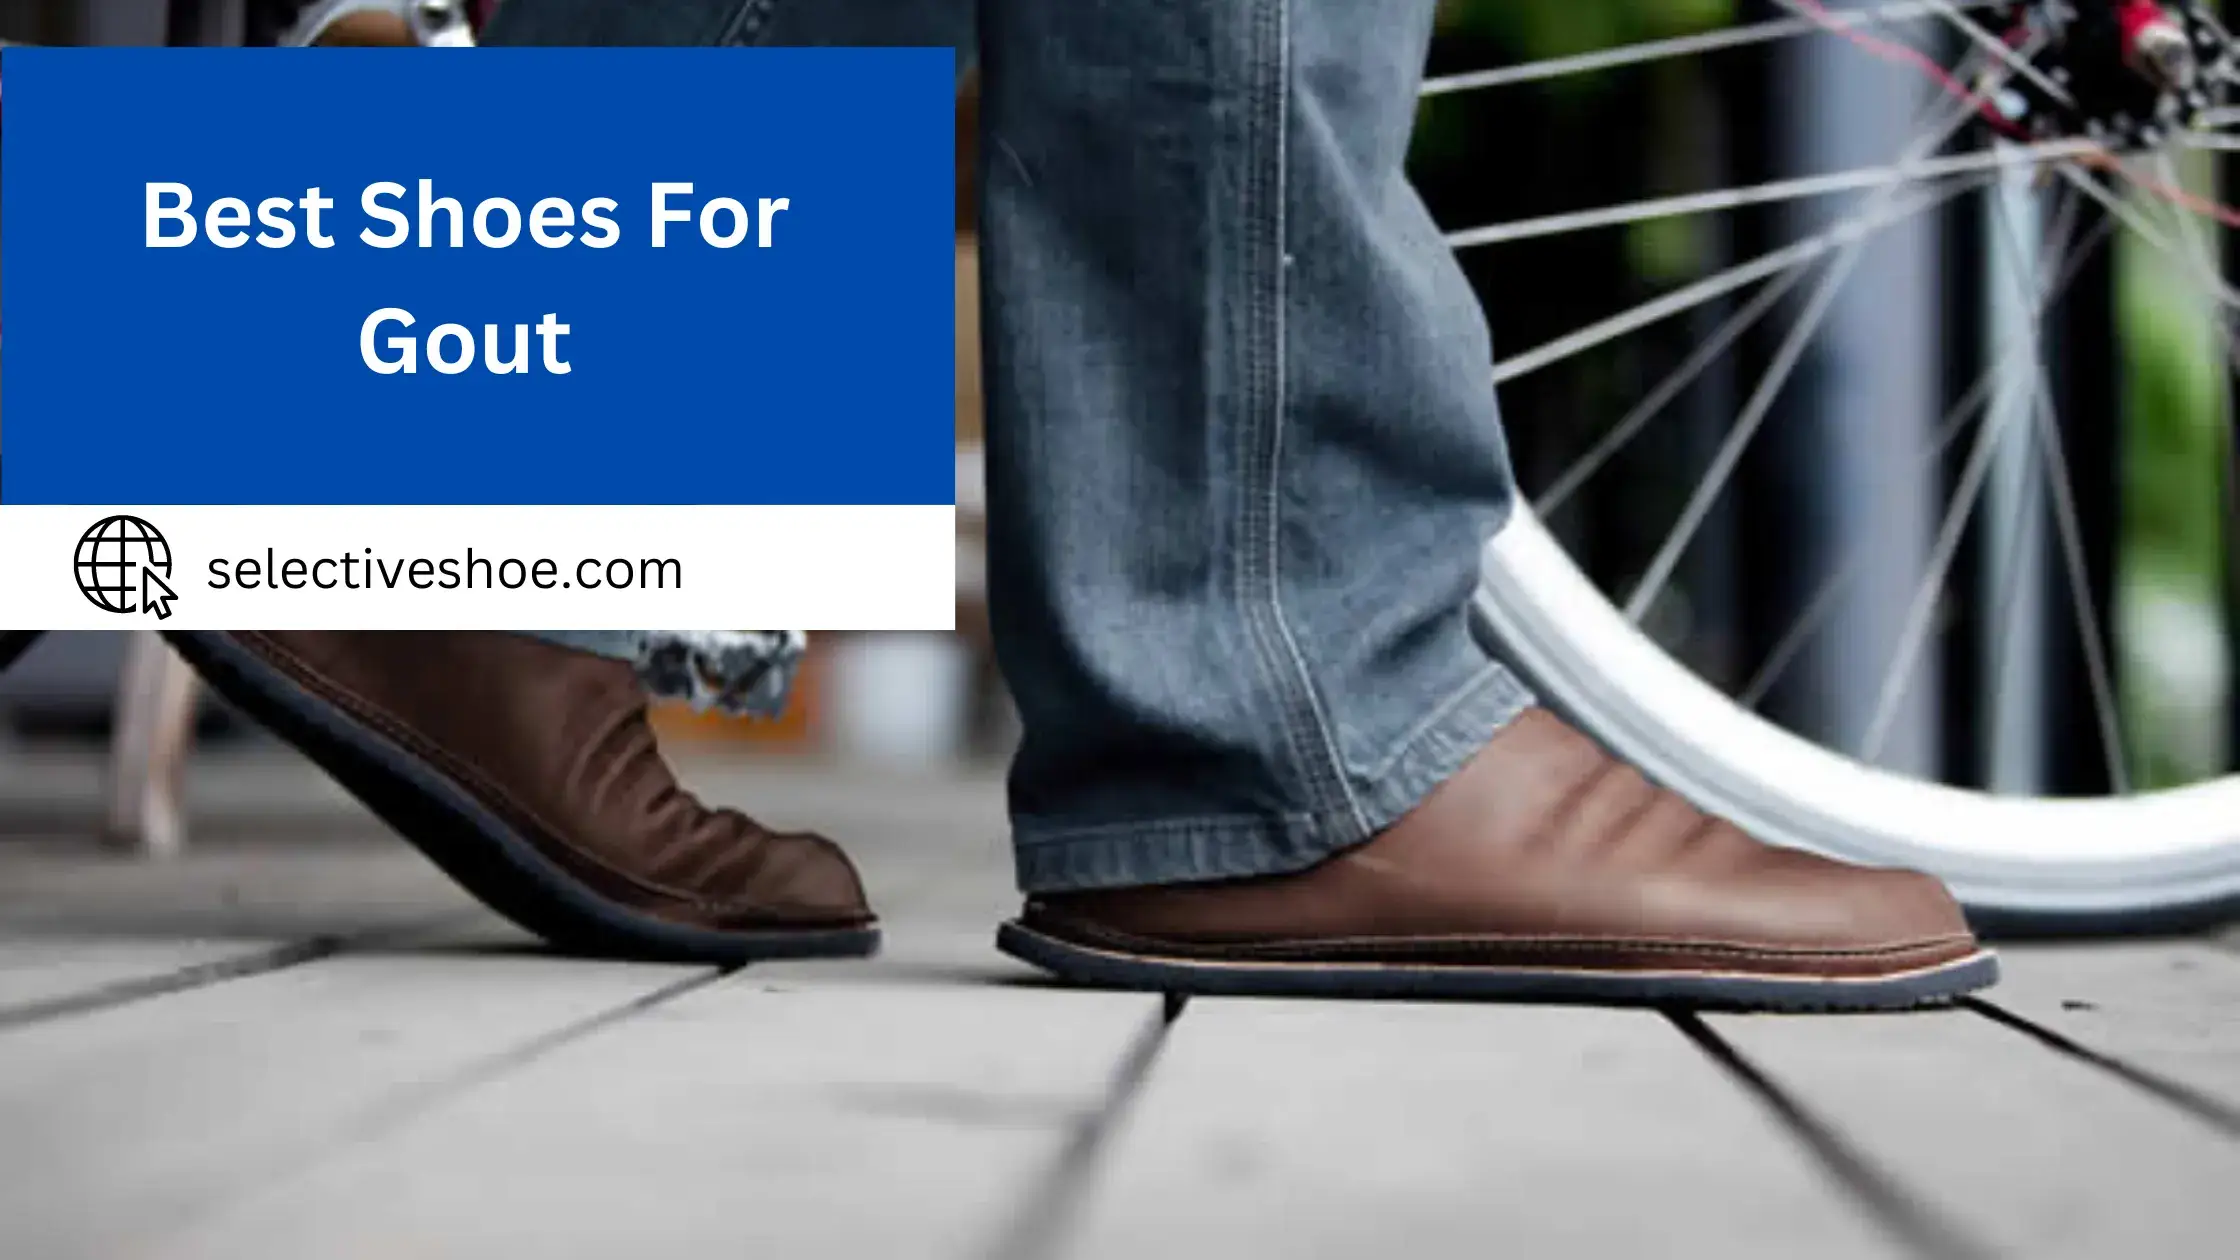 Best Shoes For Gout - A Comprehensive Guide